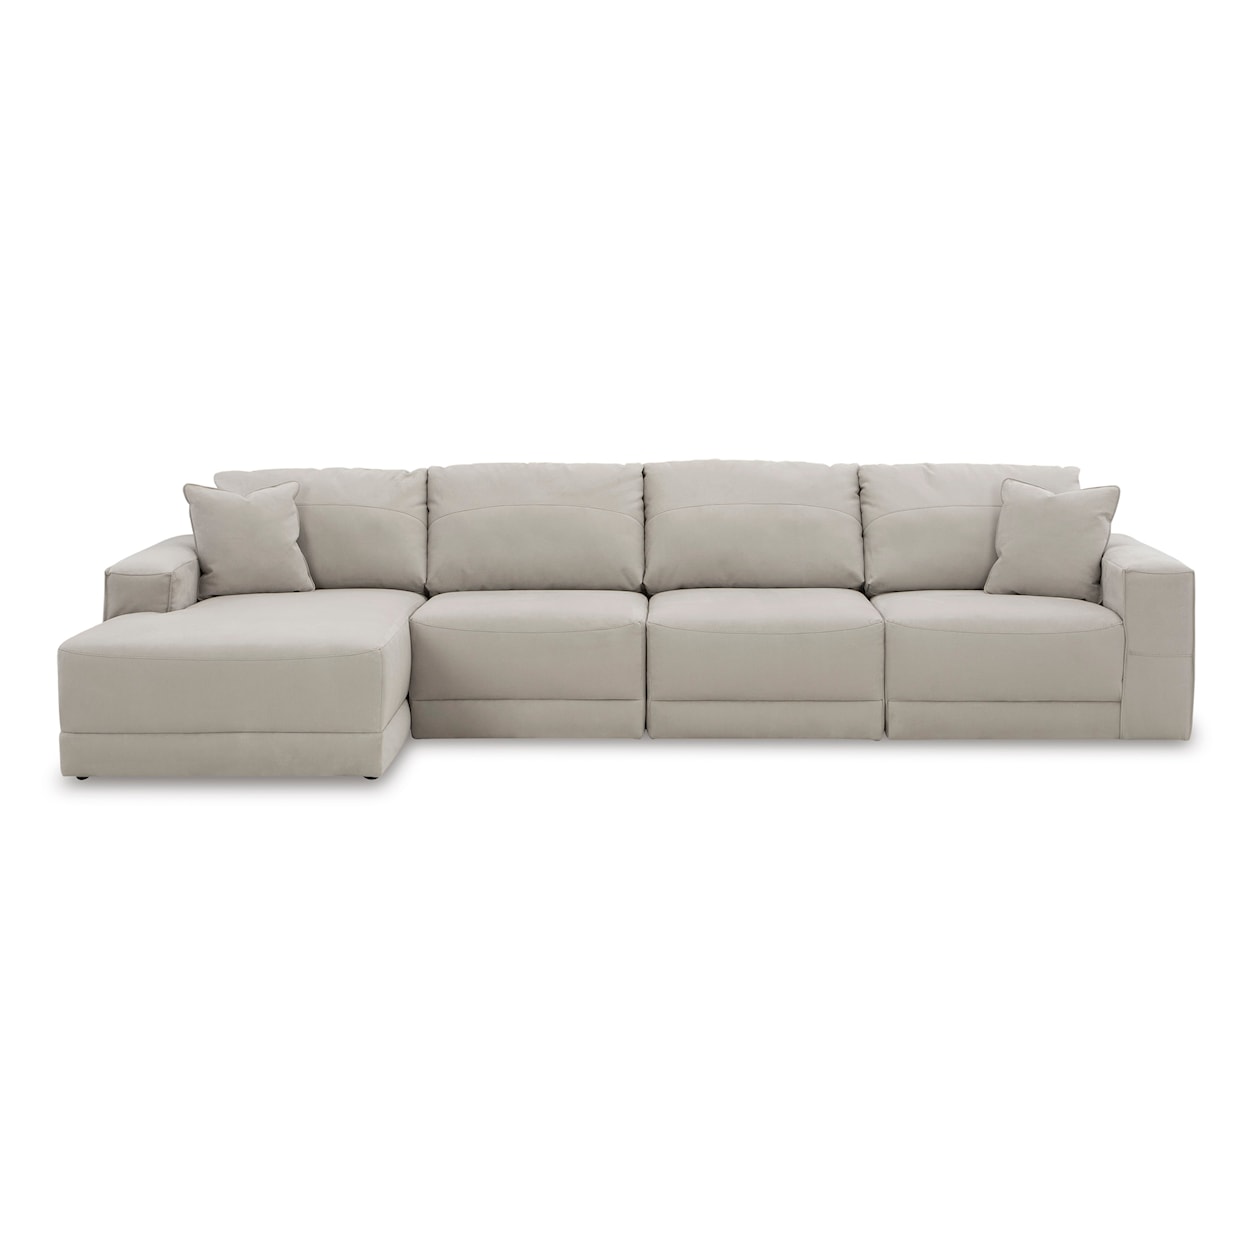 JB King Next-Gen Gaucho 4-Piece Sectional Sofa with Chaise